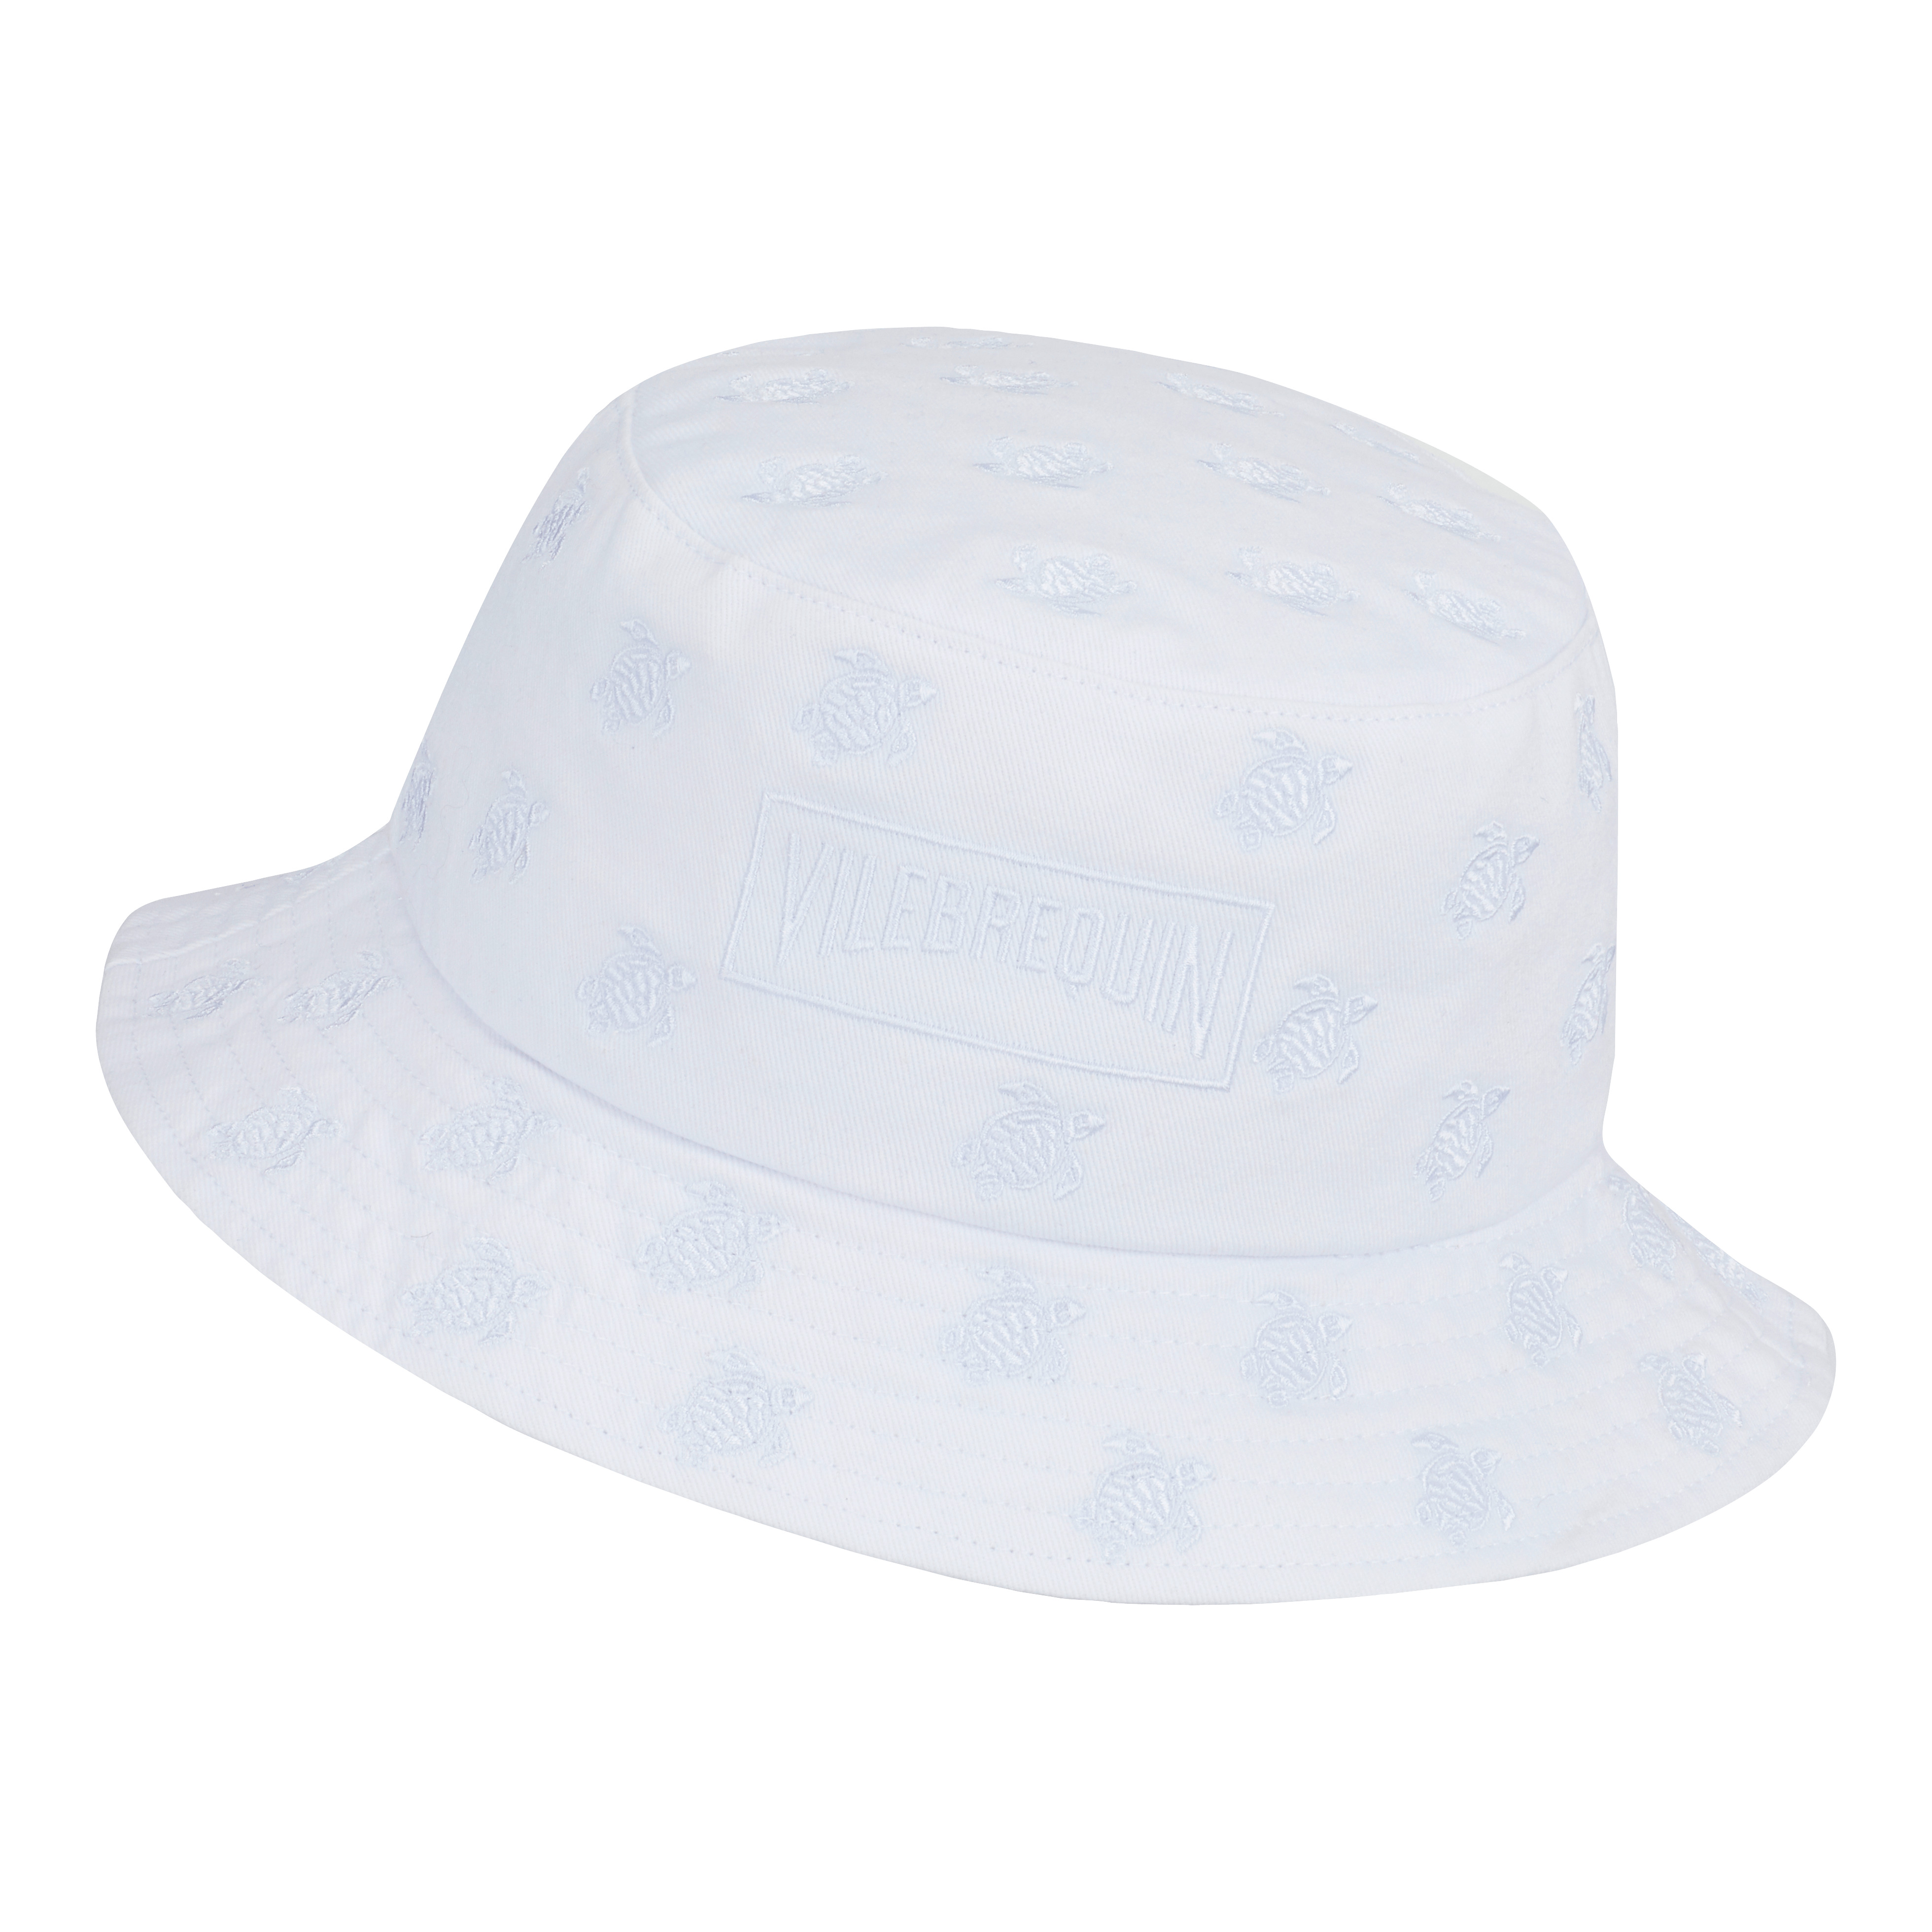 Embroidered Bucket Hat Turtles All Over - 1